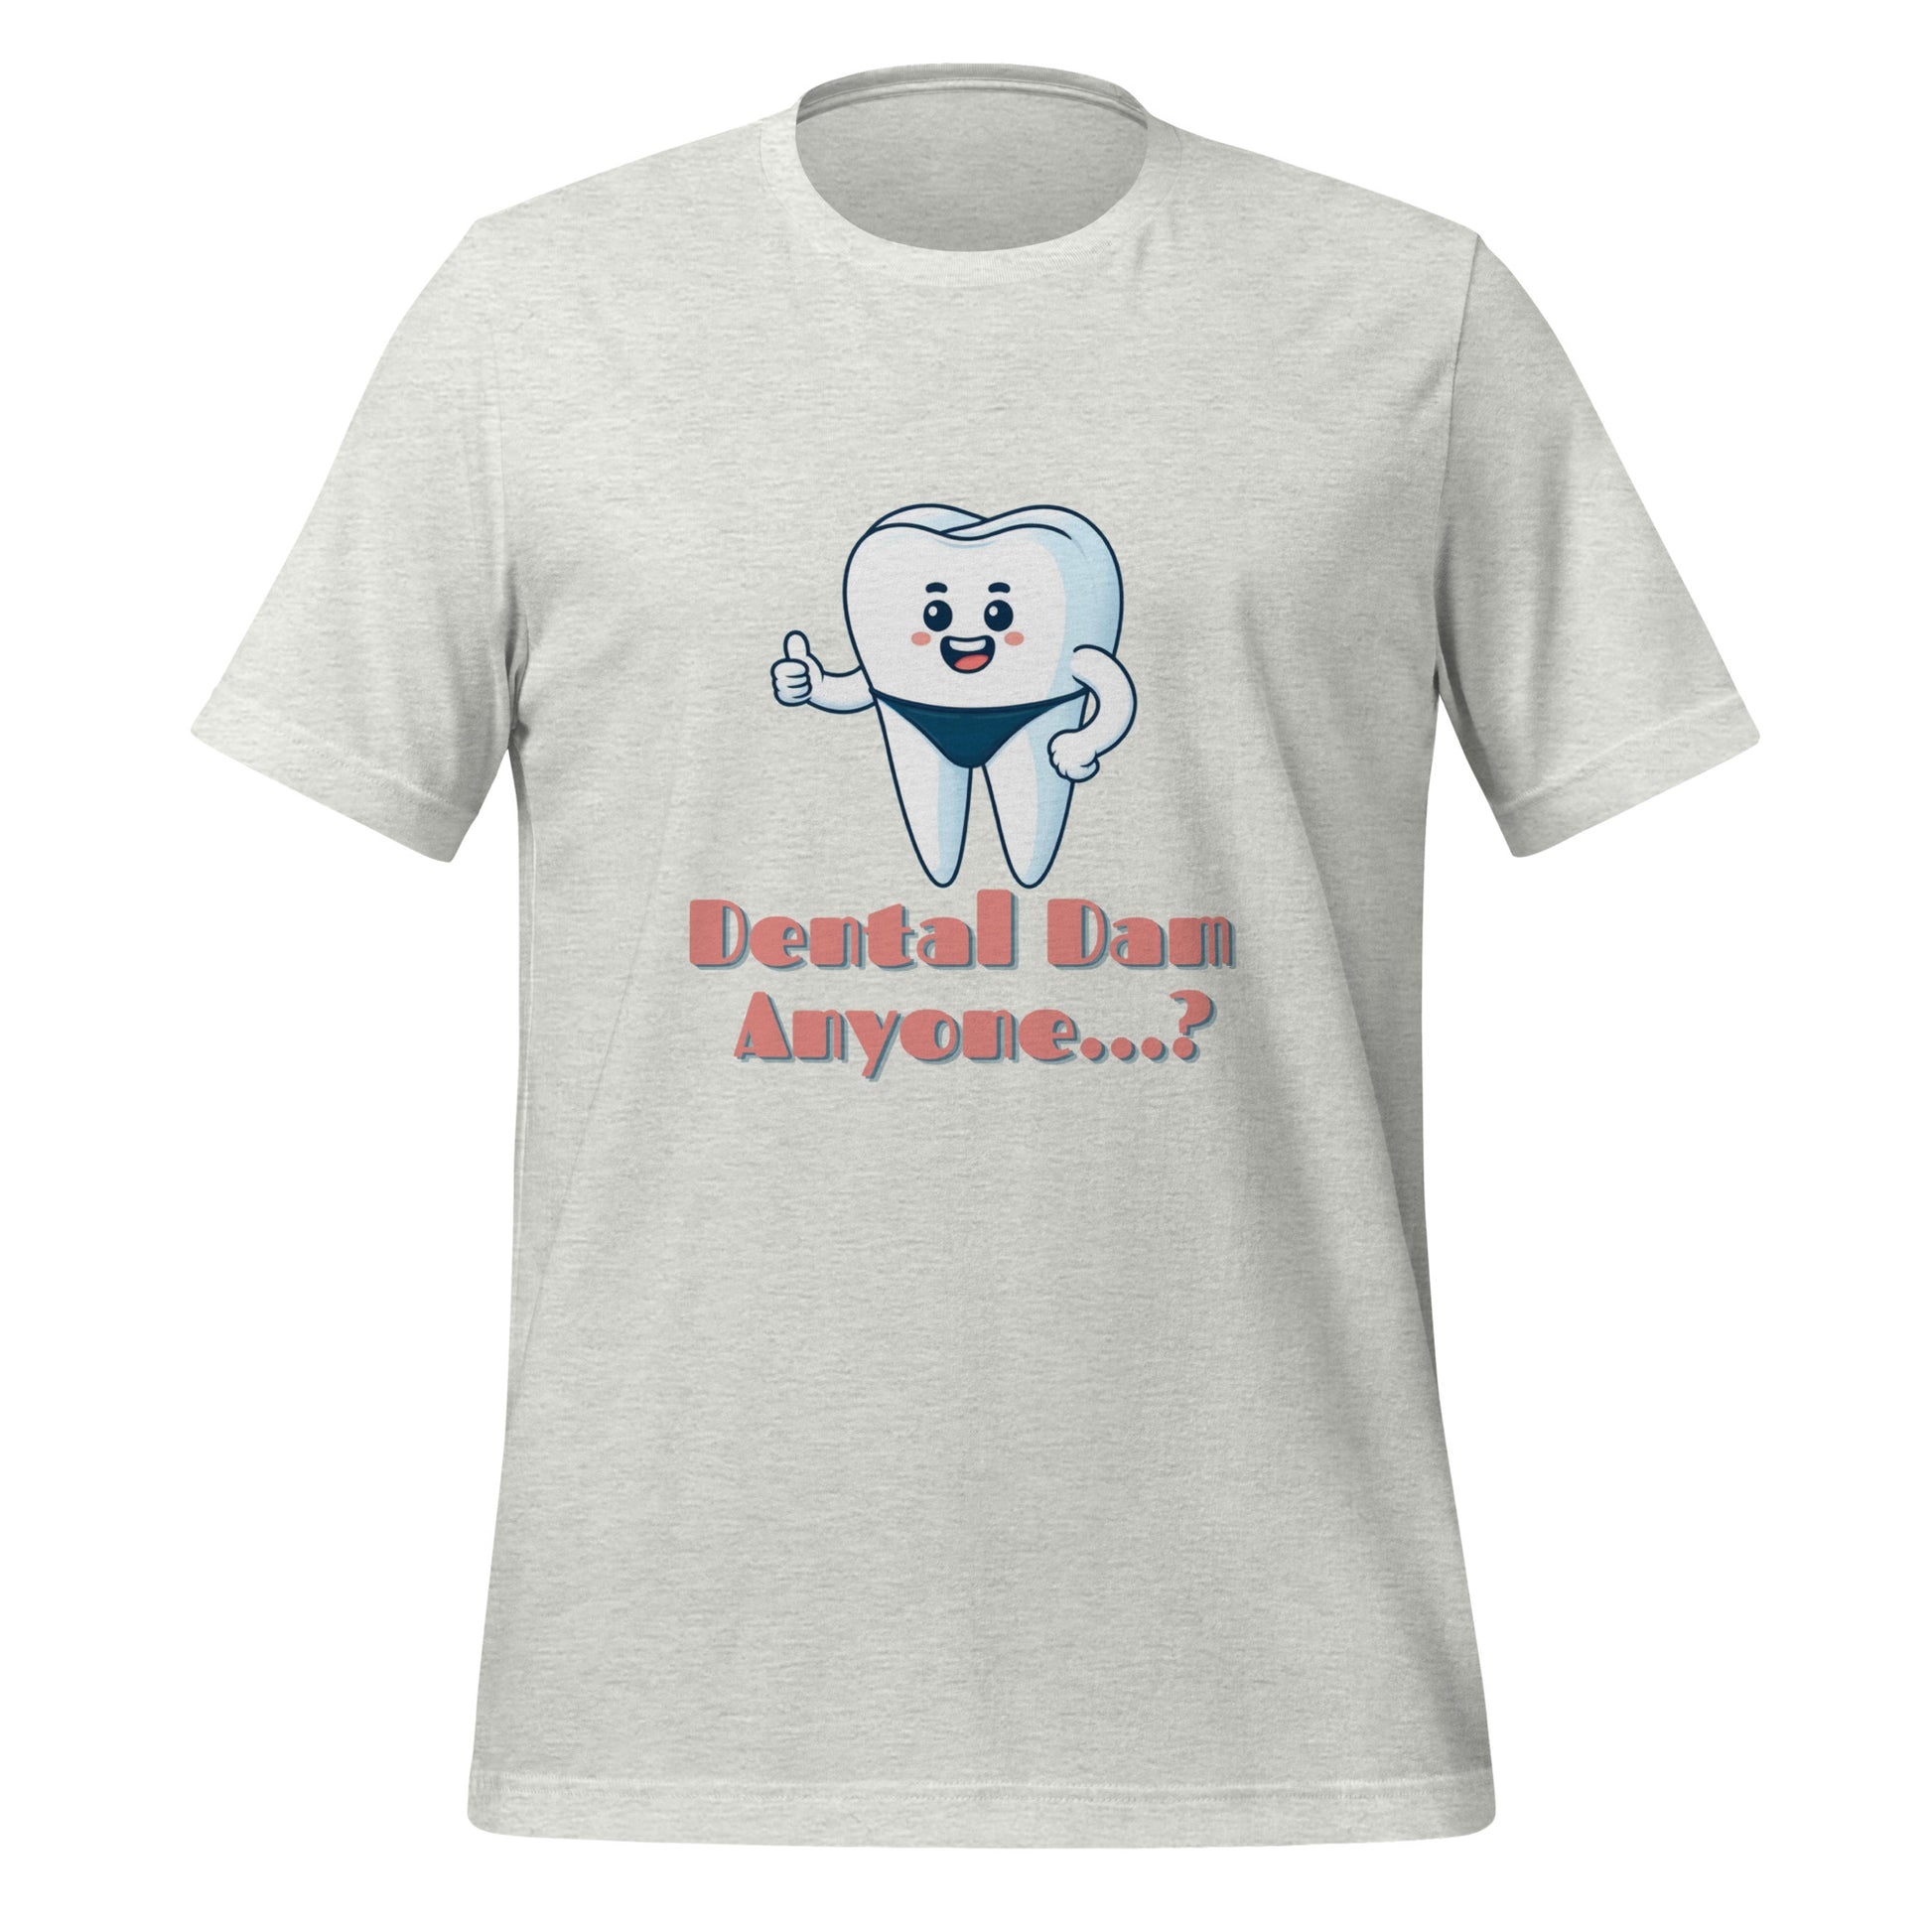 Funny dental shirt featuring a playful tooth character in a speedo with the text ‘Dental Dam Anyone?’, perfect for dentists, dental hygienists, and dental students who enjoy dental humor. This dental shirt is a unique addition to any dental professional’s wardrobe, making it an ideal dental office shirt. Don’t miss out on our dental assistant shirts and dental hygiene shirts. Ash color.